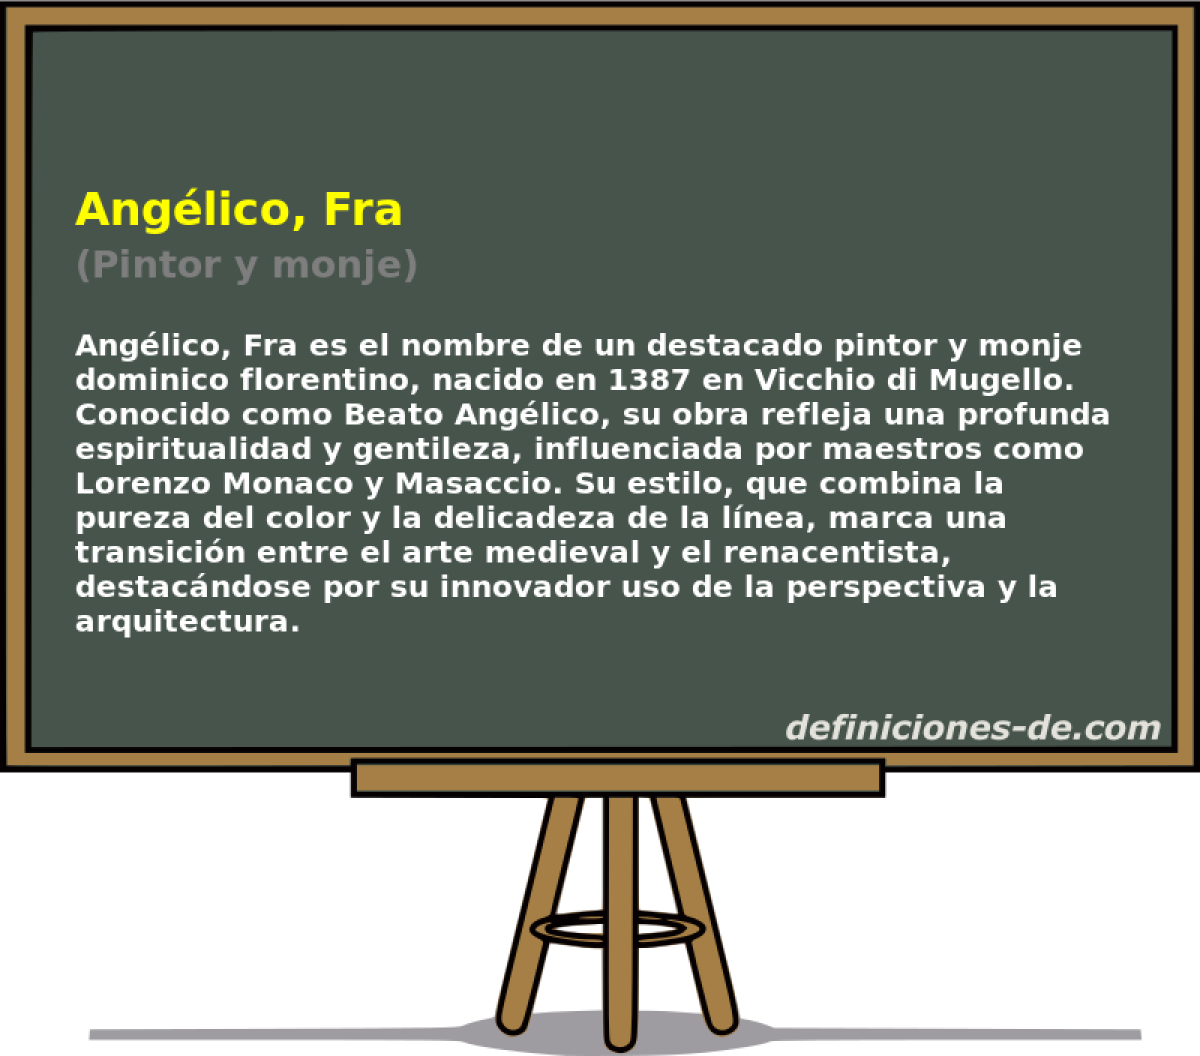 Anglico, Fra (Pintor y monje)